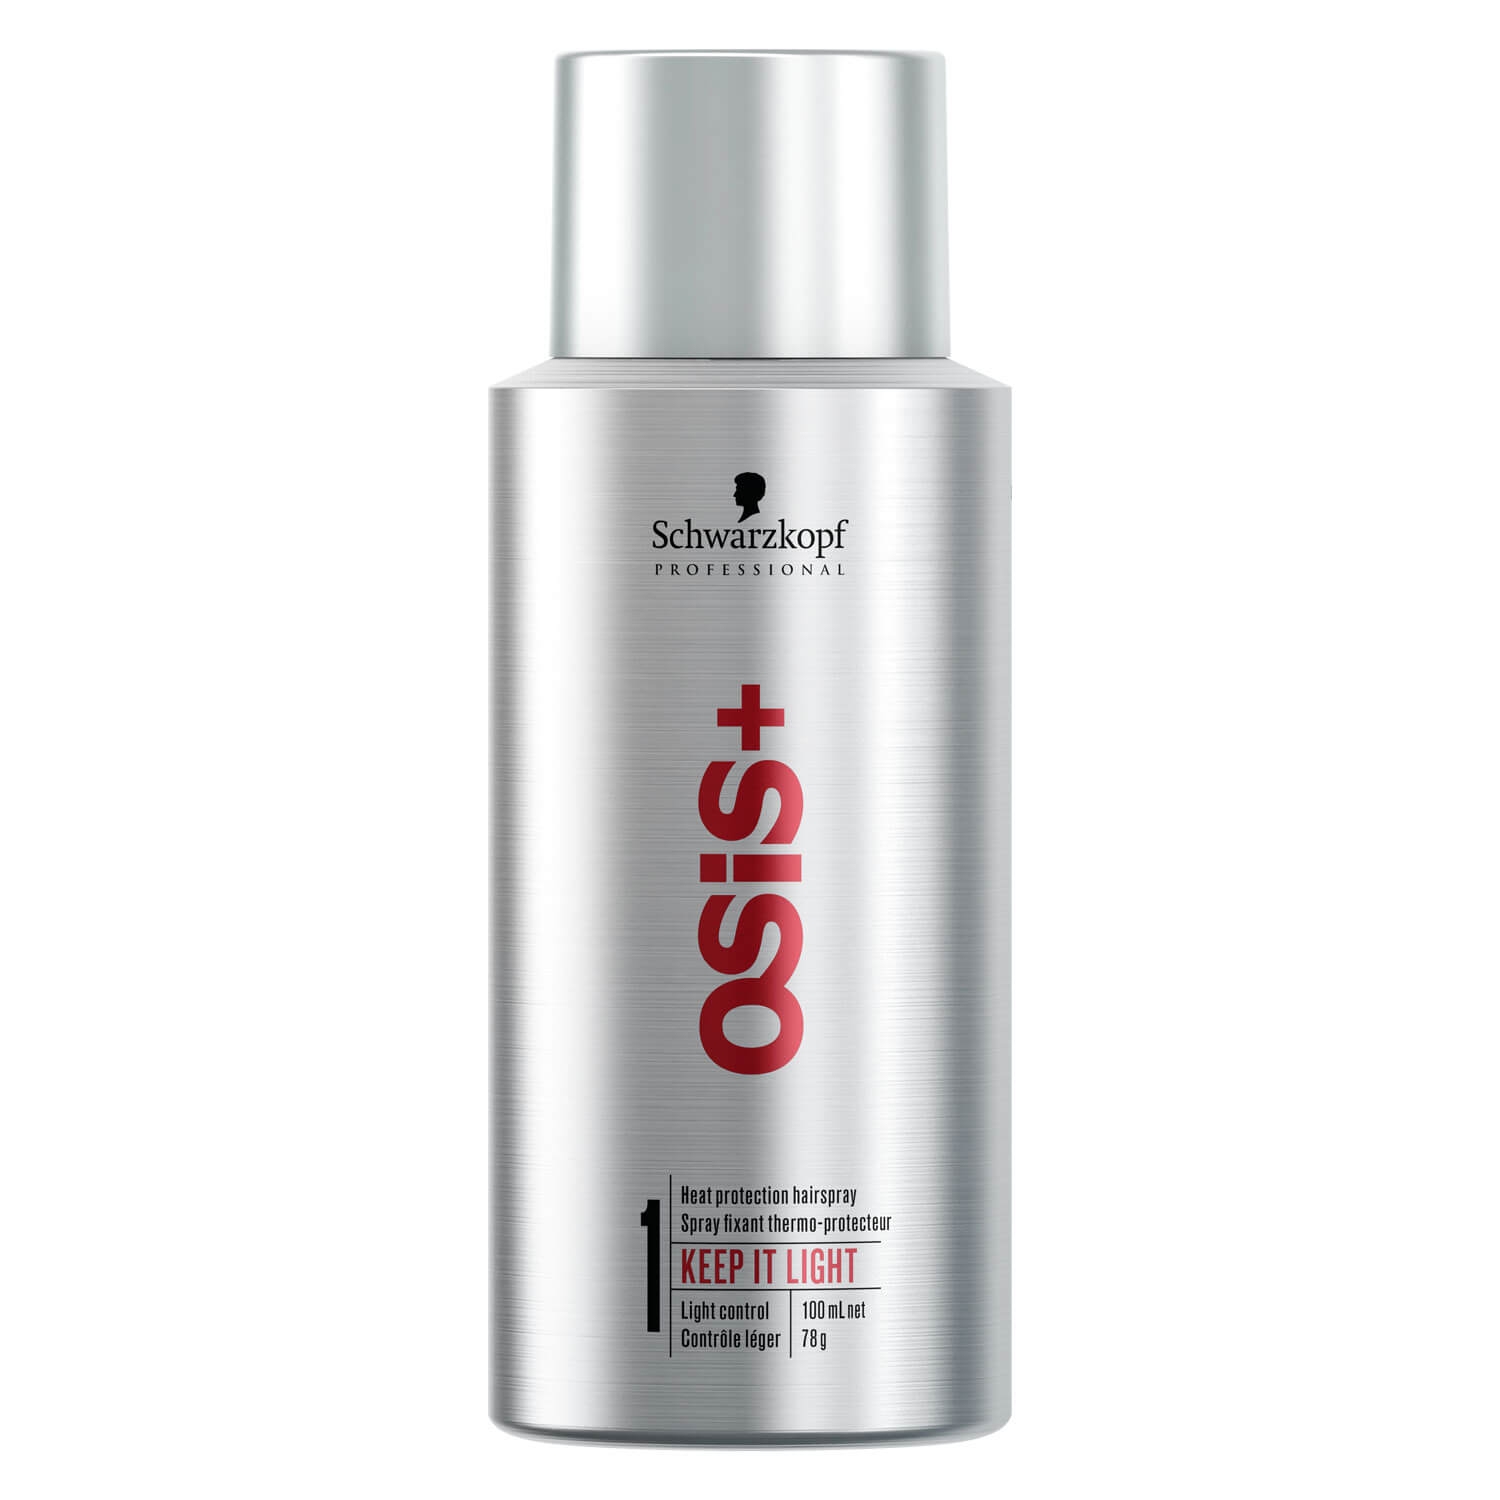 Product image from Osis - Keep it Light Heat Protection Hairspray